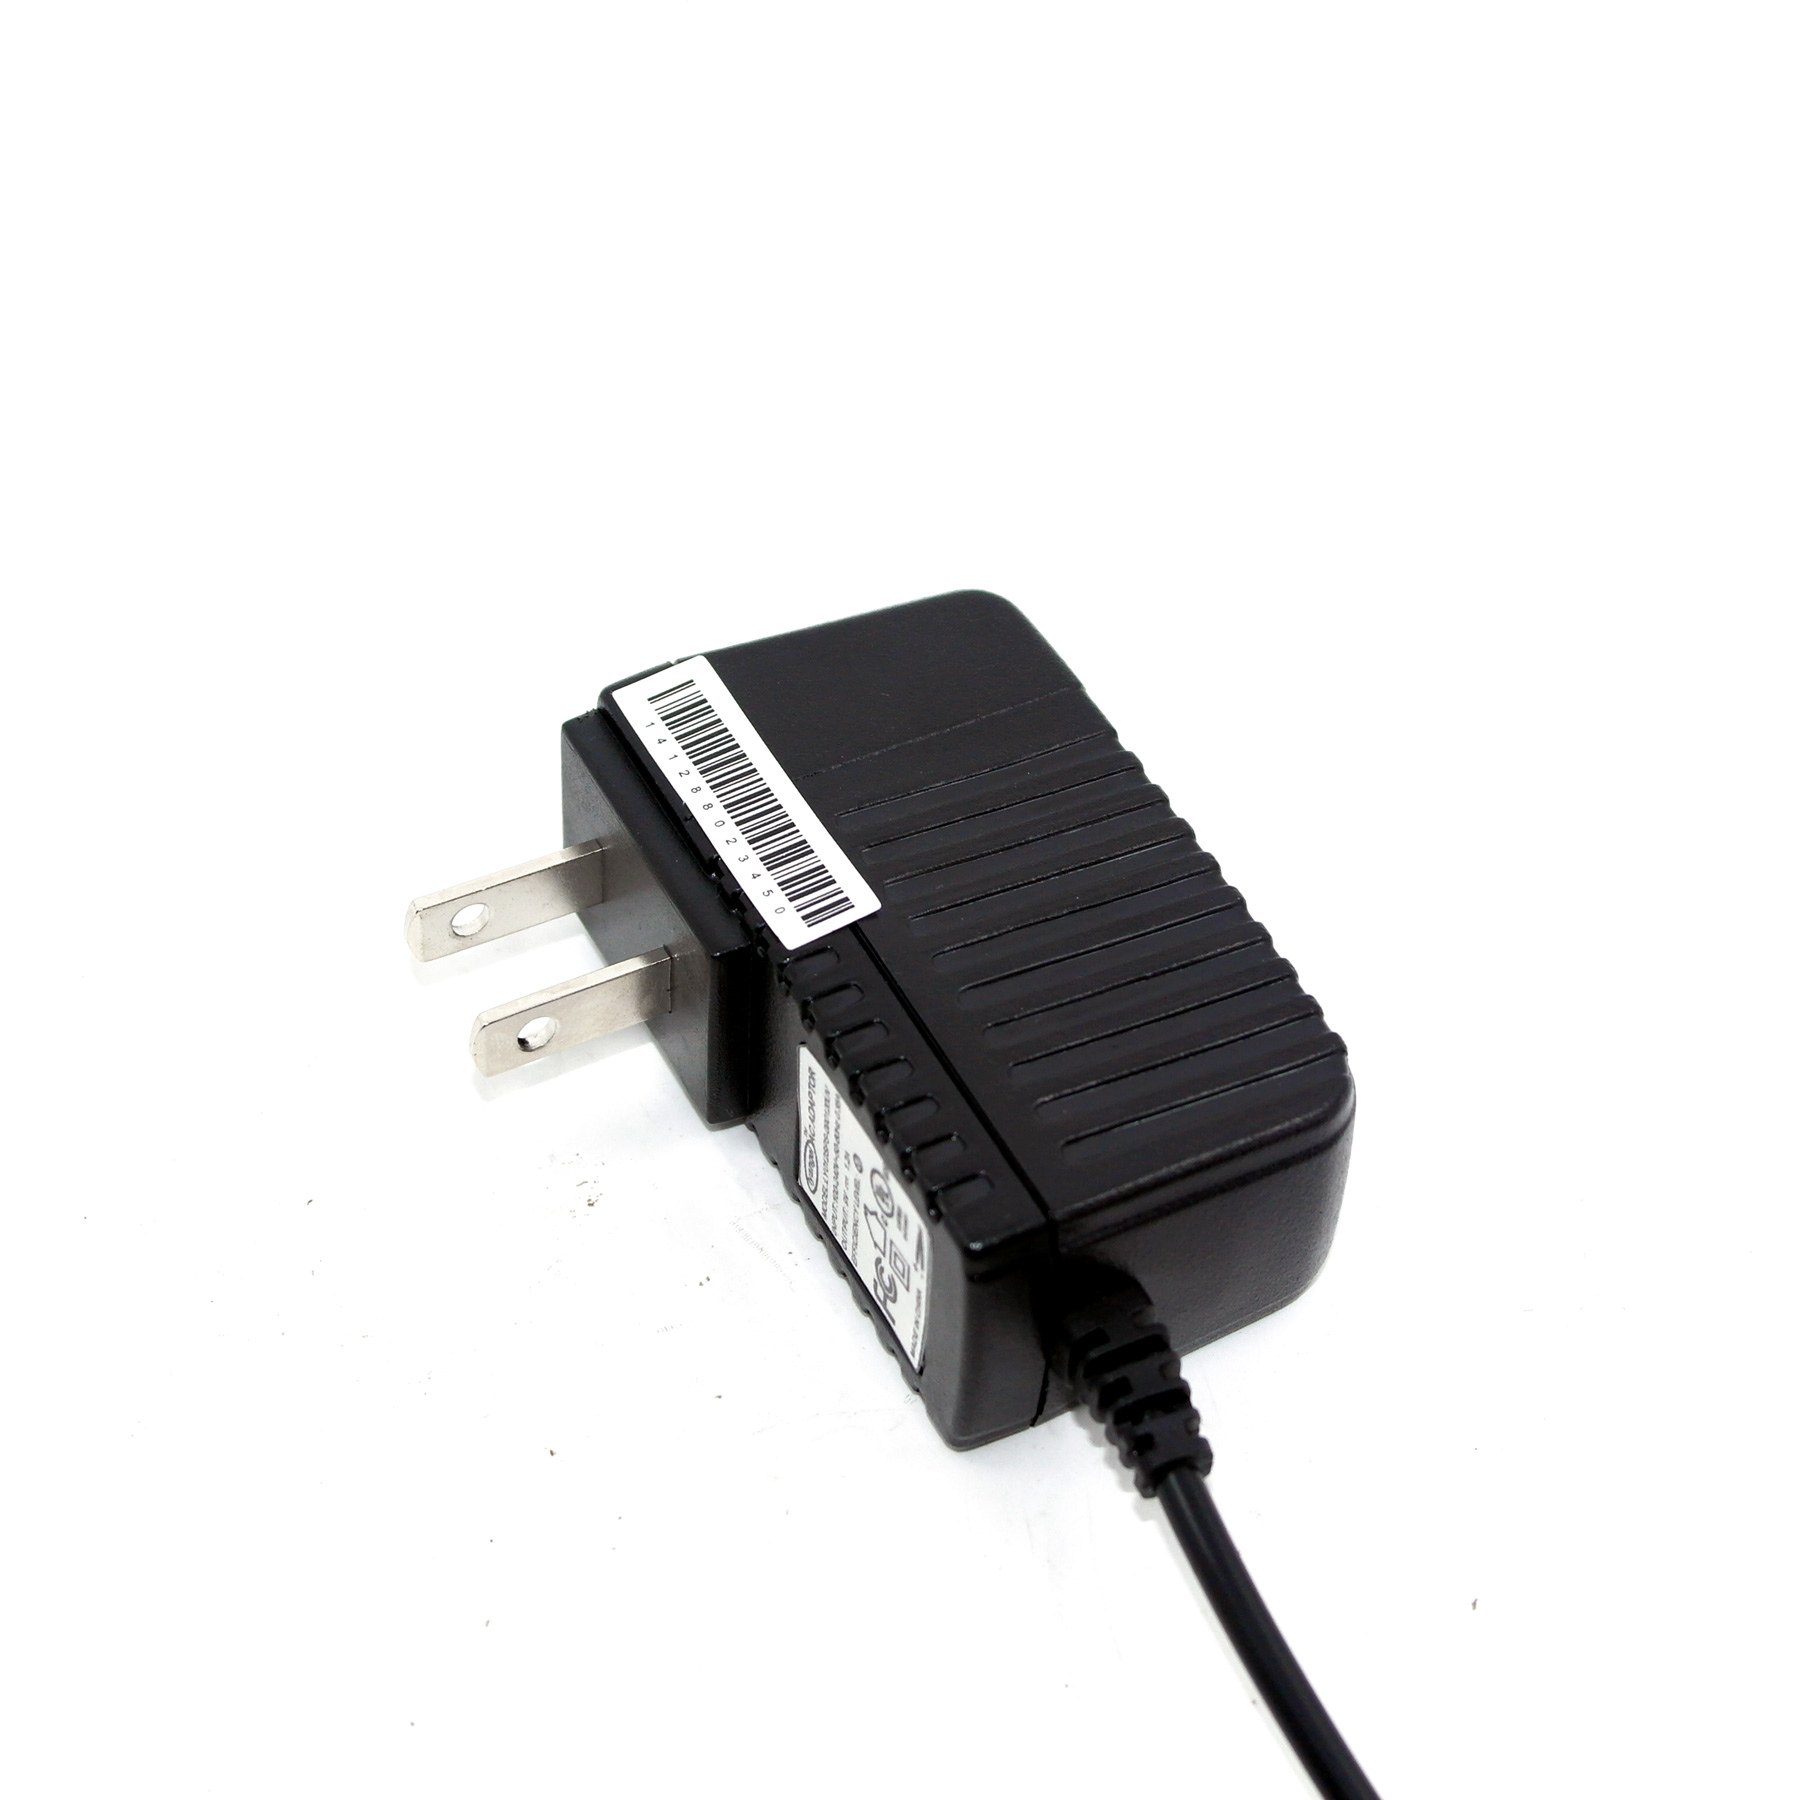 5V 2A adaptor, 5V 2A switching adapter